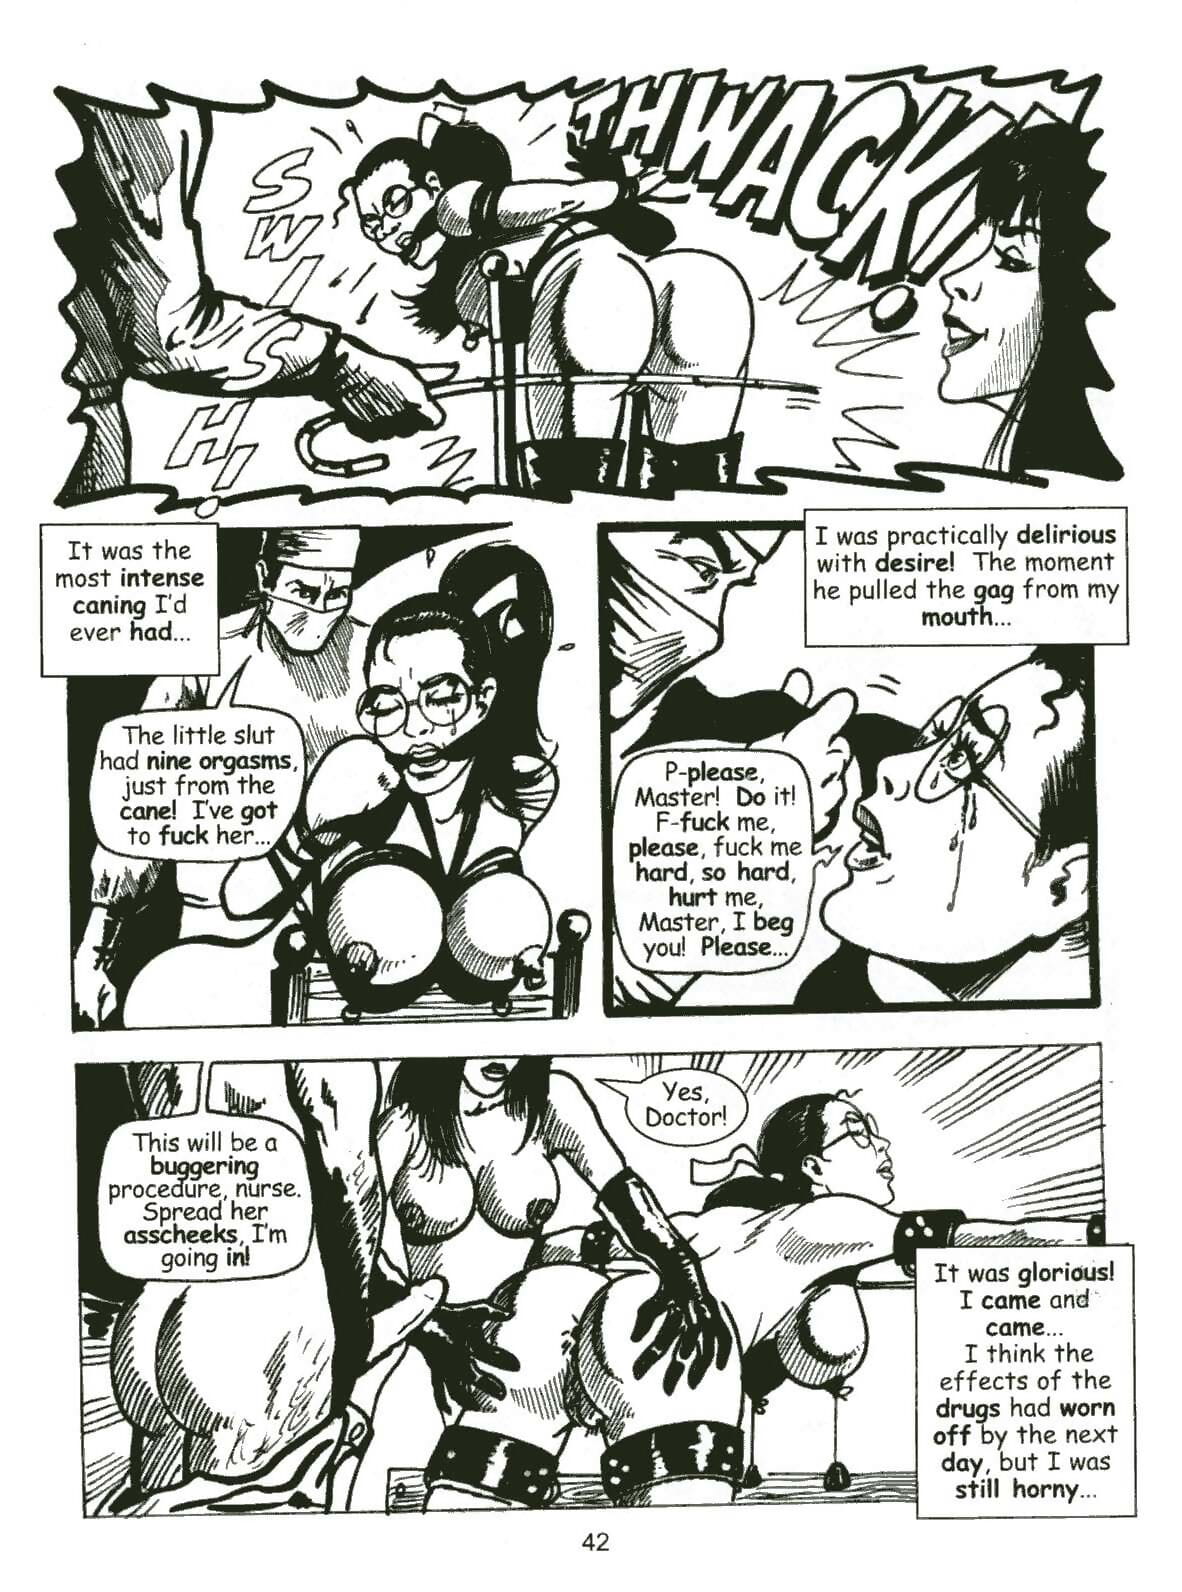 Dees Diary - Part #2 - part 2 page 1